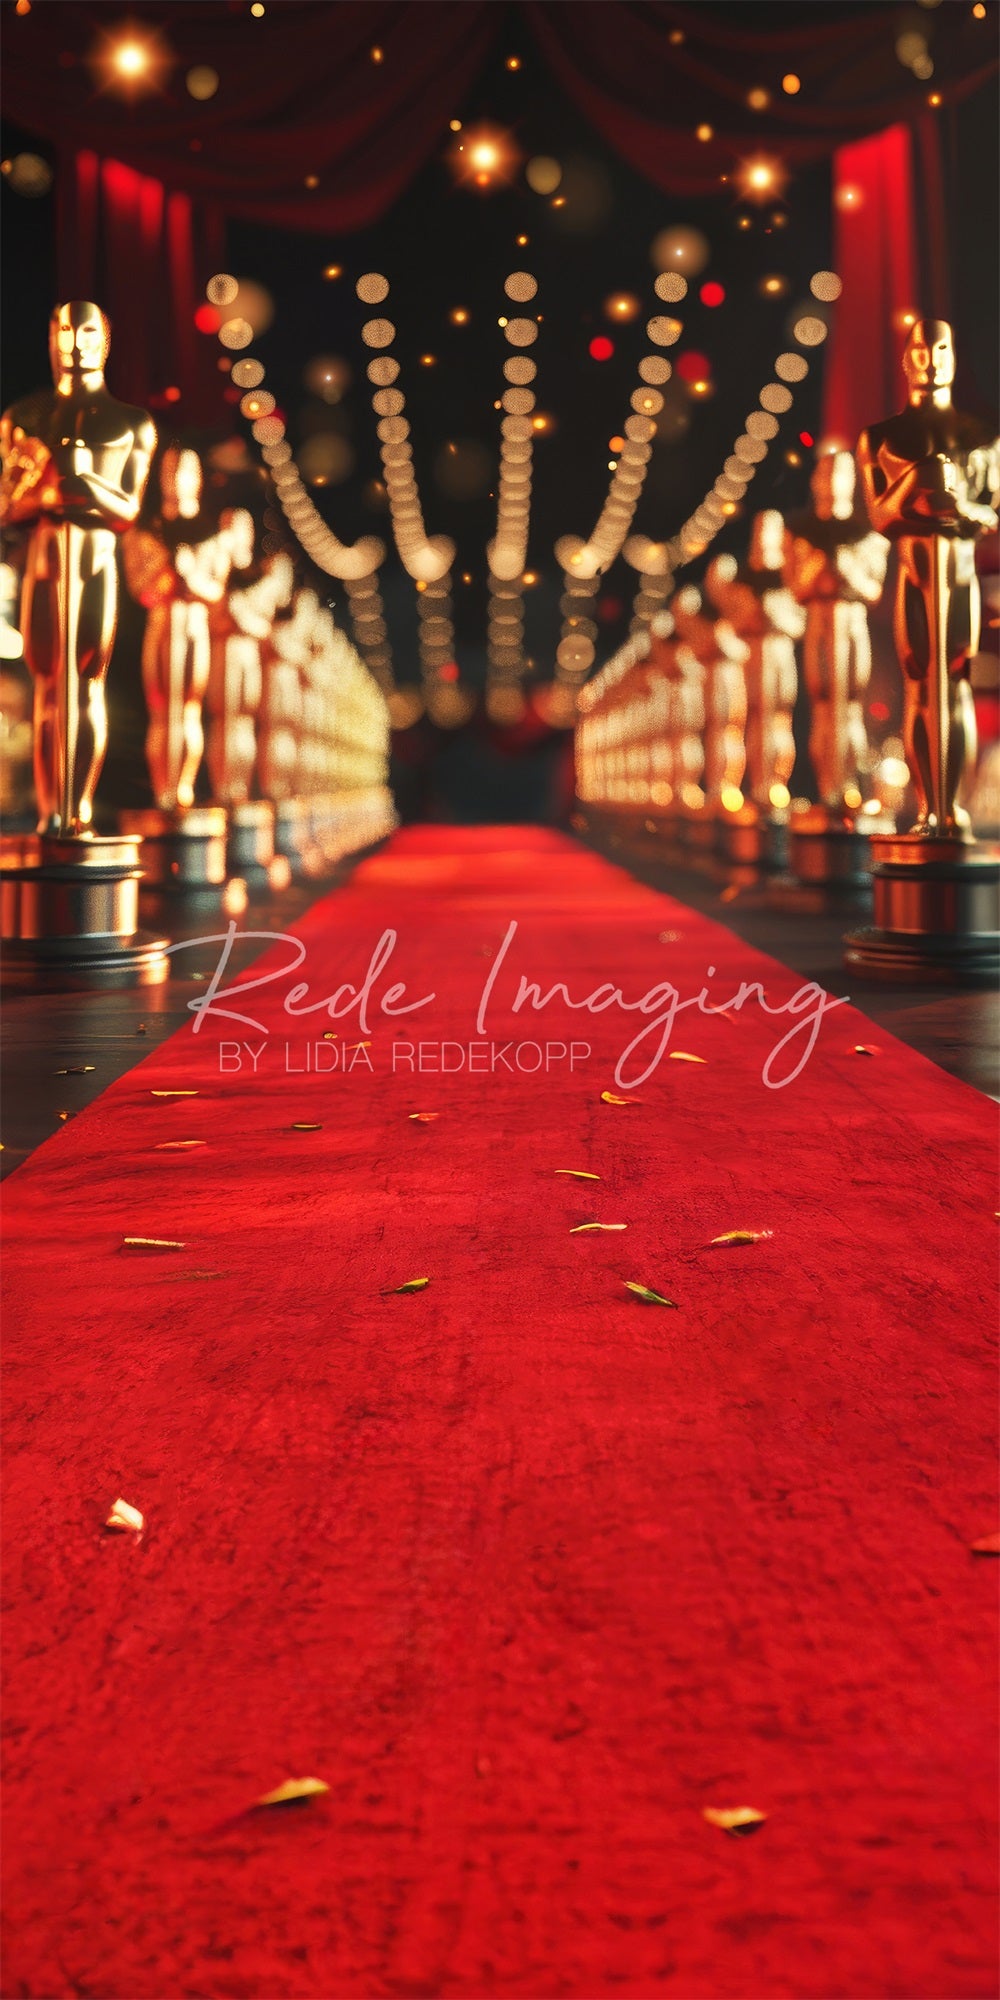 Kate Sweep Retro Movie Red Carpet Stage Backdrop Designed by Lidia Redekopp